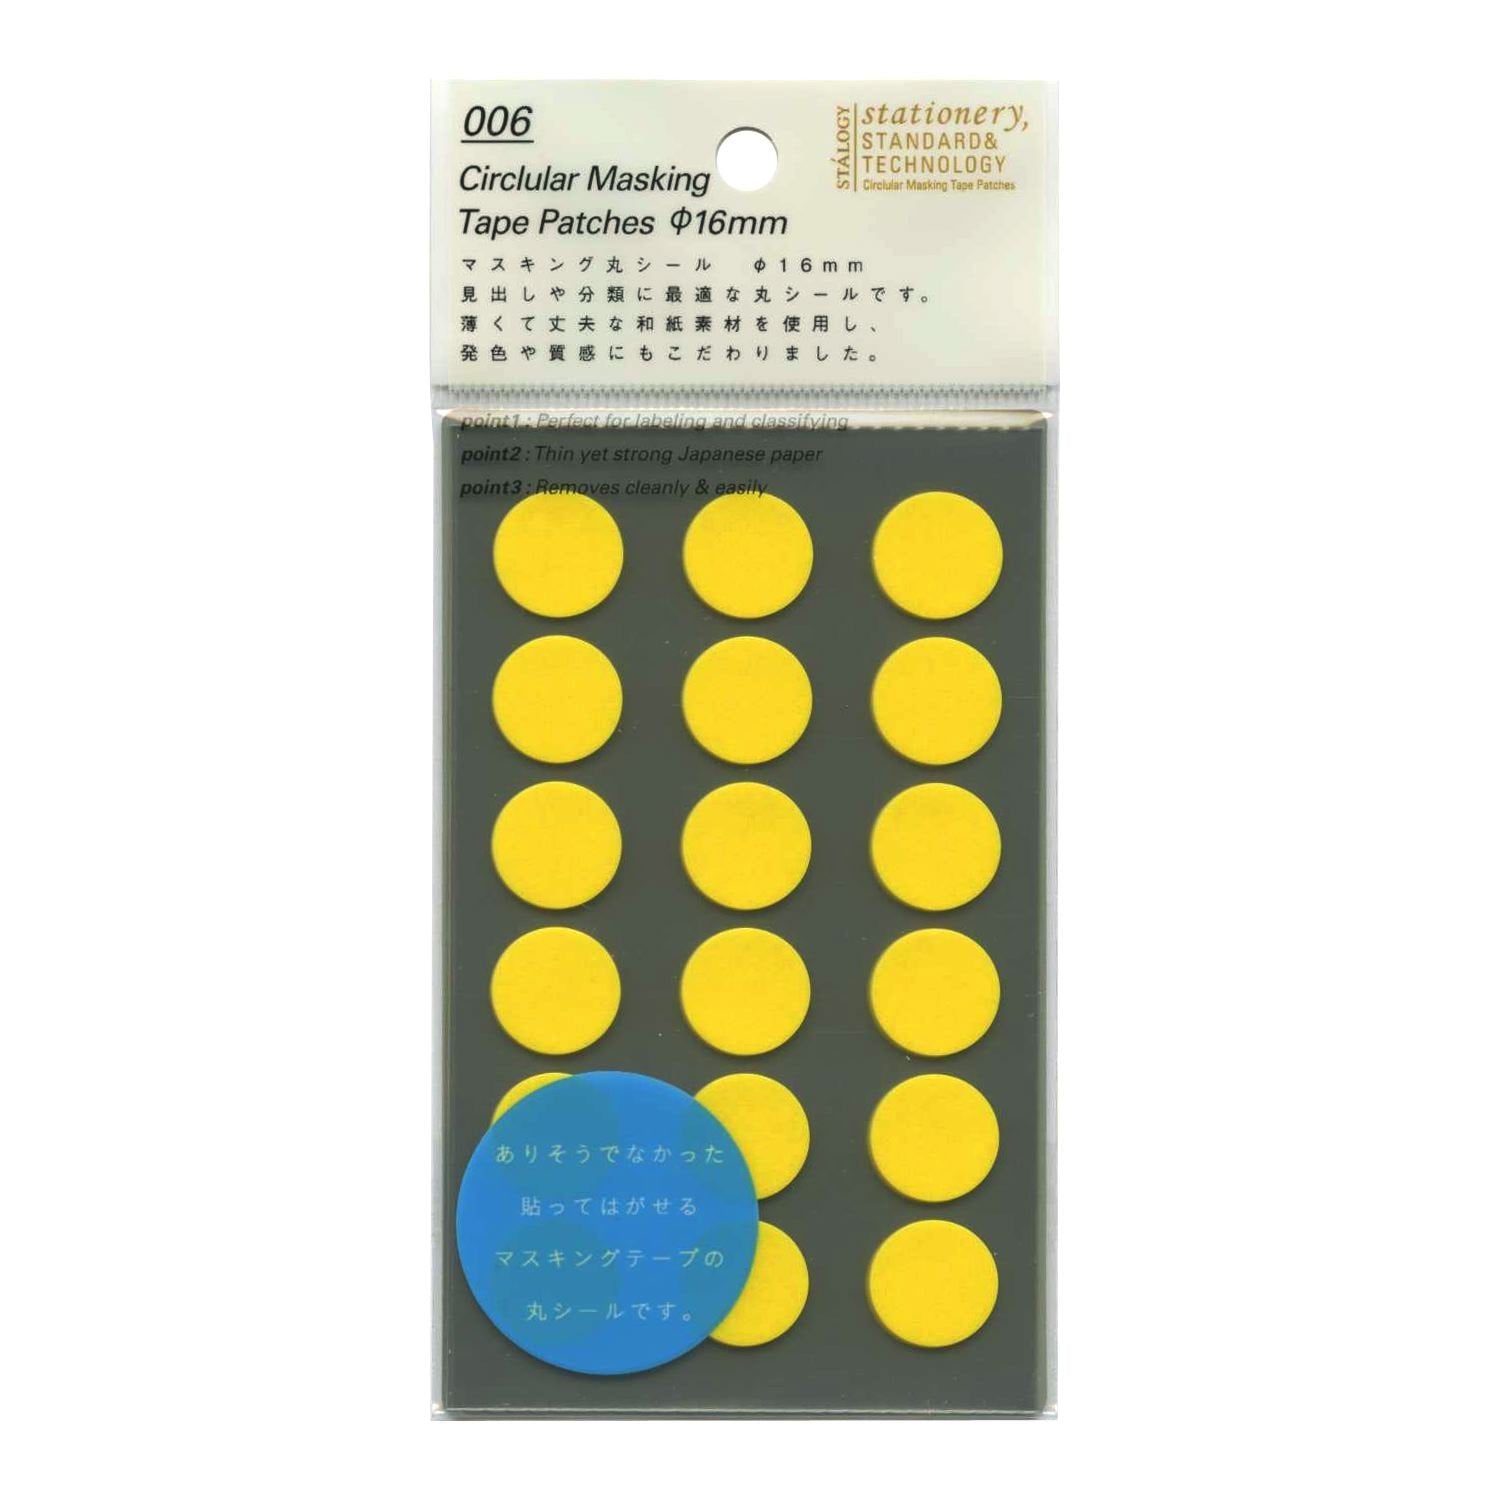 Yellow Circular Masking Tape Patches. The circular masking patches are made from thin, yet strong Japanese paper, perfect for labelling and classifying. Durable Writeable.